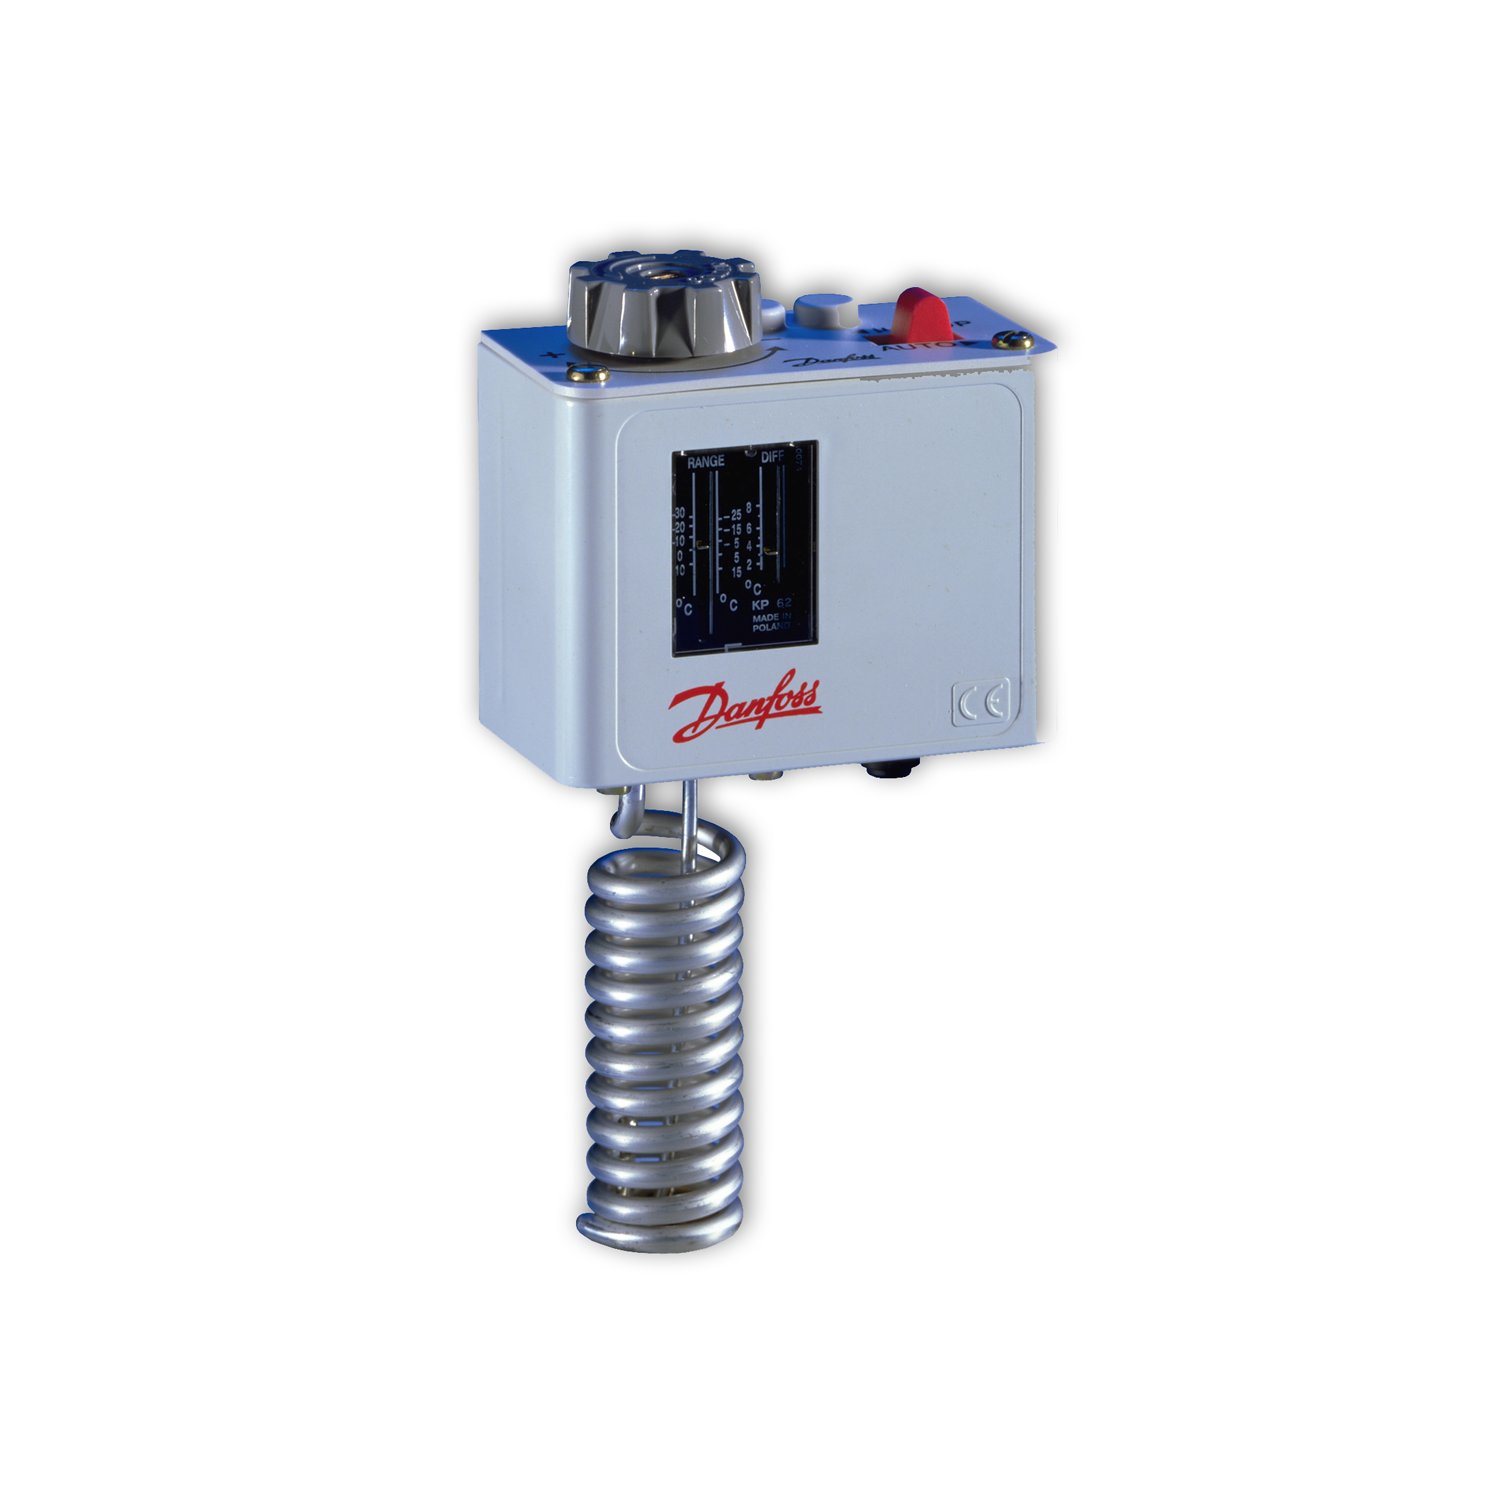 Differential thermostat DANFOSS KP62,060L1110, field calibration -30... +15°C adjustable difference 2°-10°C